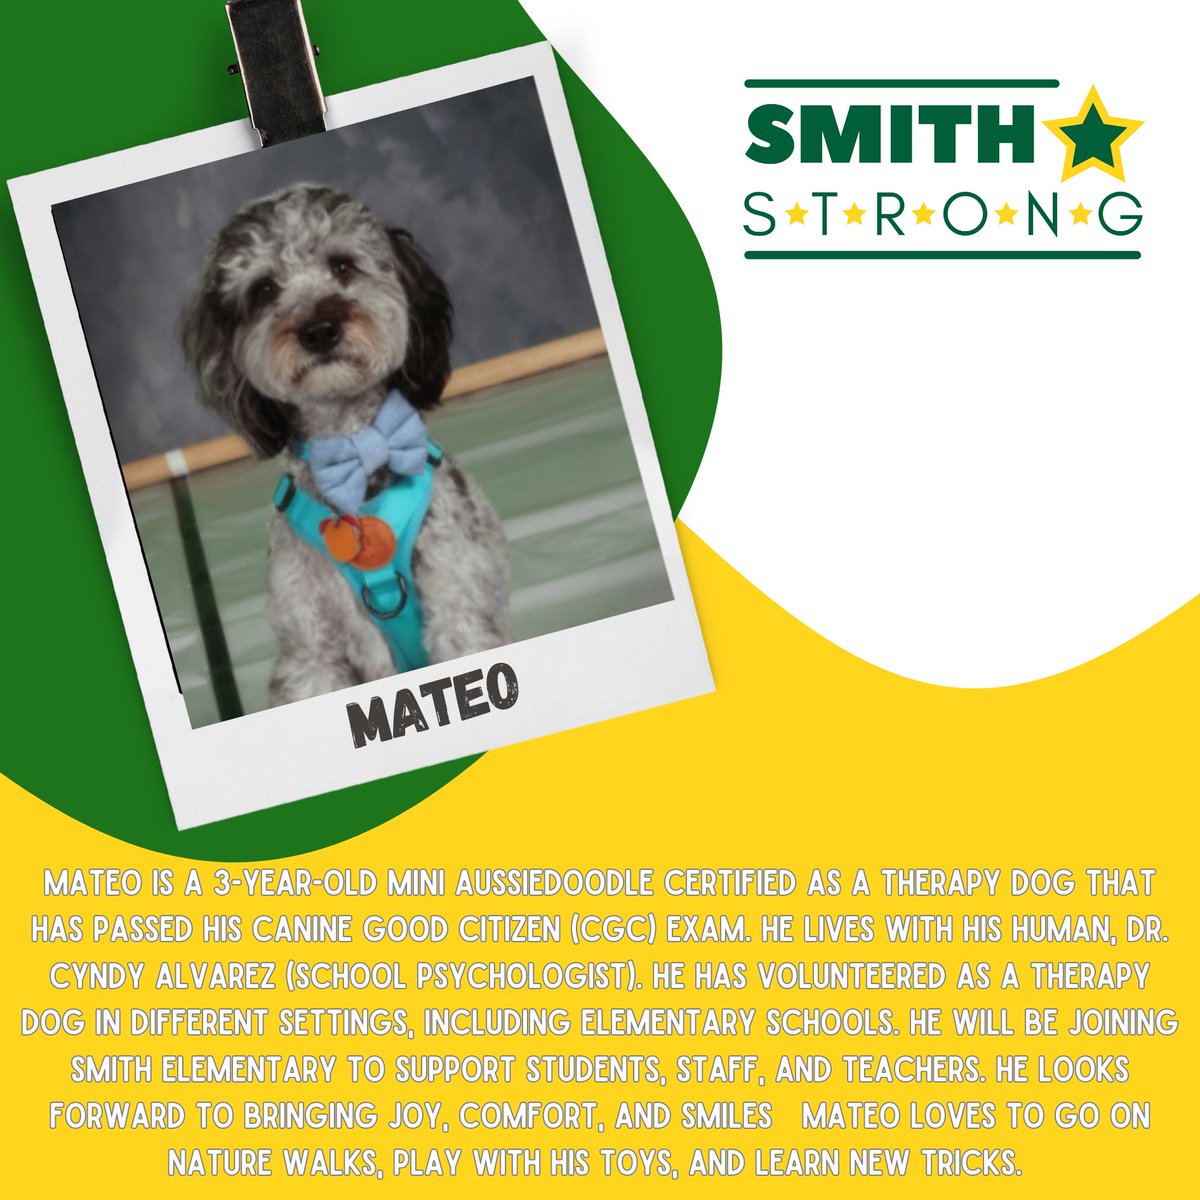 #SMITHSTRONG💪, help us welcome Dr. Cyndy Alvarez and Mateo to Smith Elementary! They will be joining our Special Education Support team here at Smith Elementary!💪💚⭐️